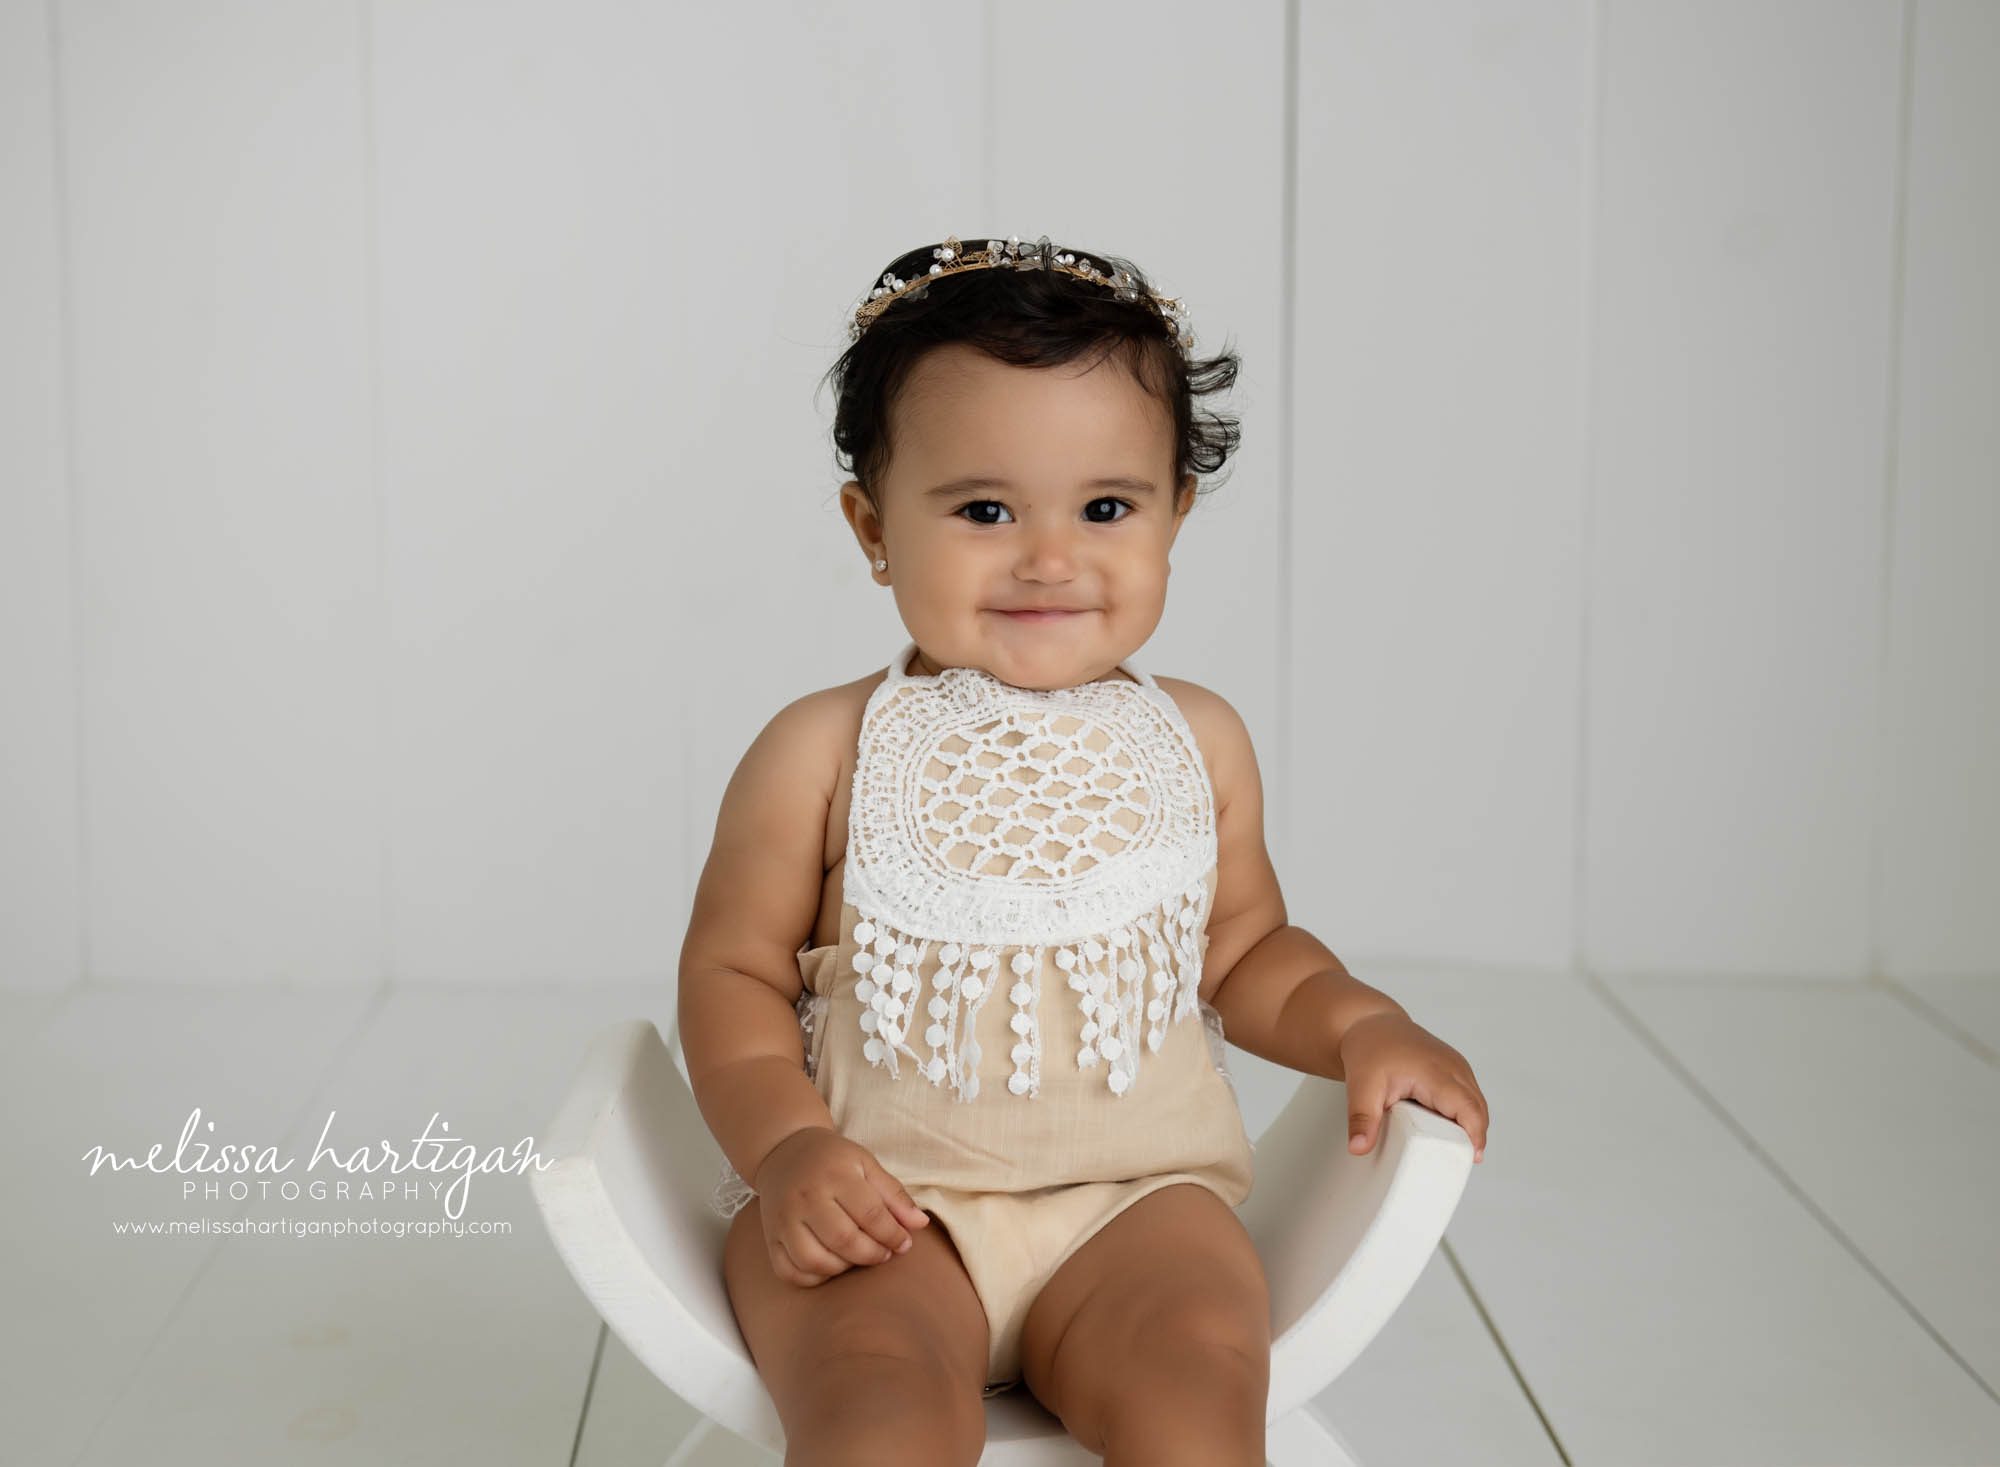 Baby girl wearing white lace outfit smiling at camera CT baby milestone photography session